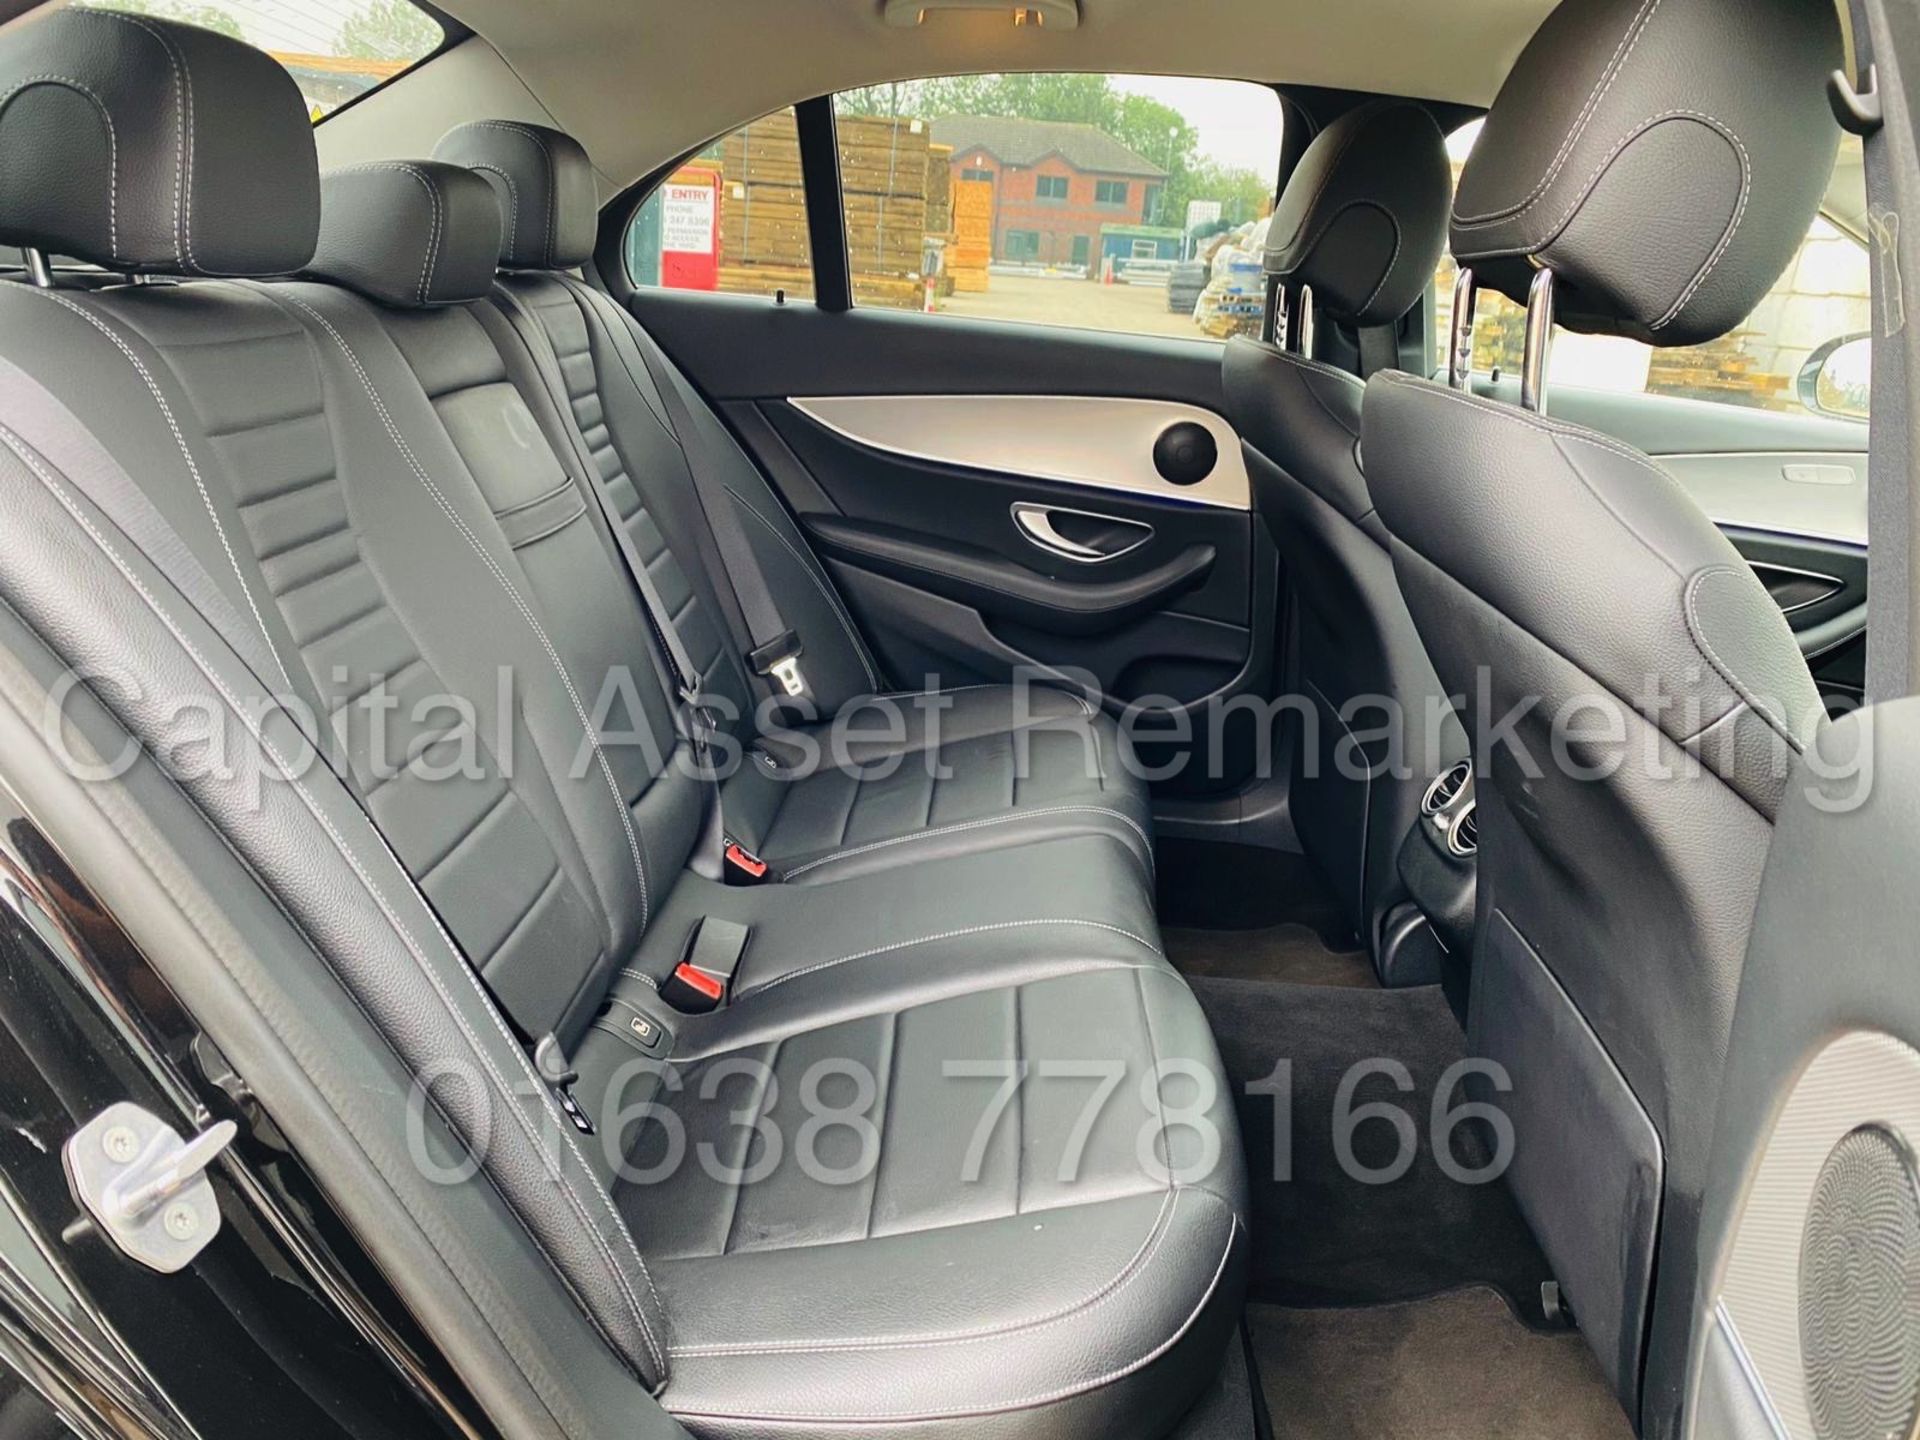 (On Sale) MERCEDES-BENZ E220D *SALOON* (2018 - NEW MODEL) '9-G TRONIC AUTO - LEATHER - SAT NAV' - Image 34 of 52